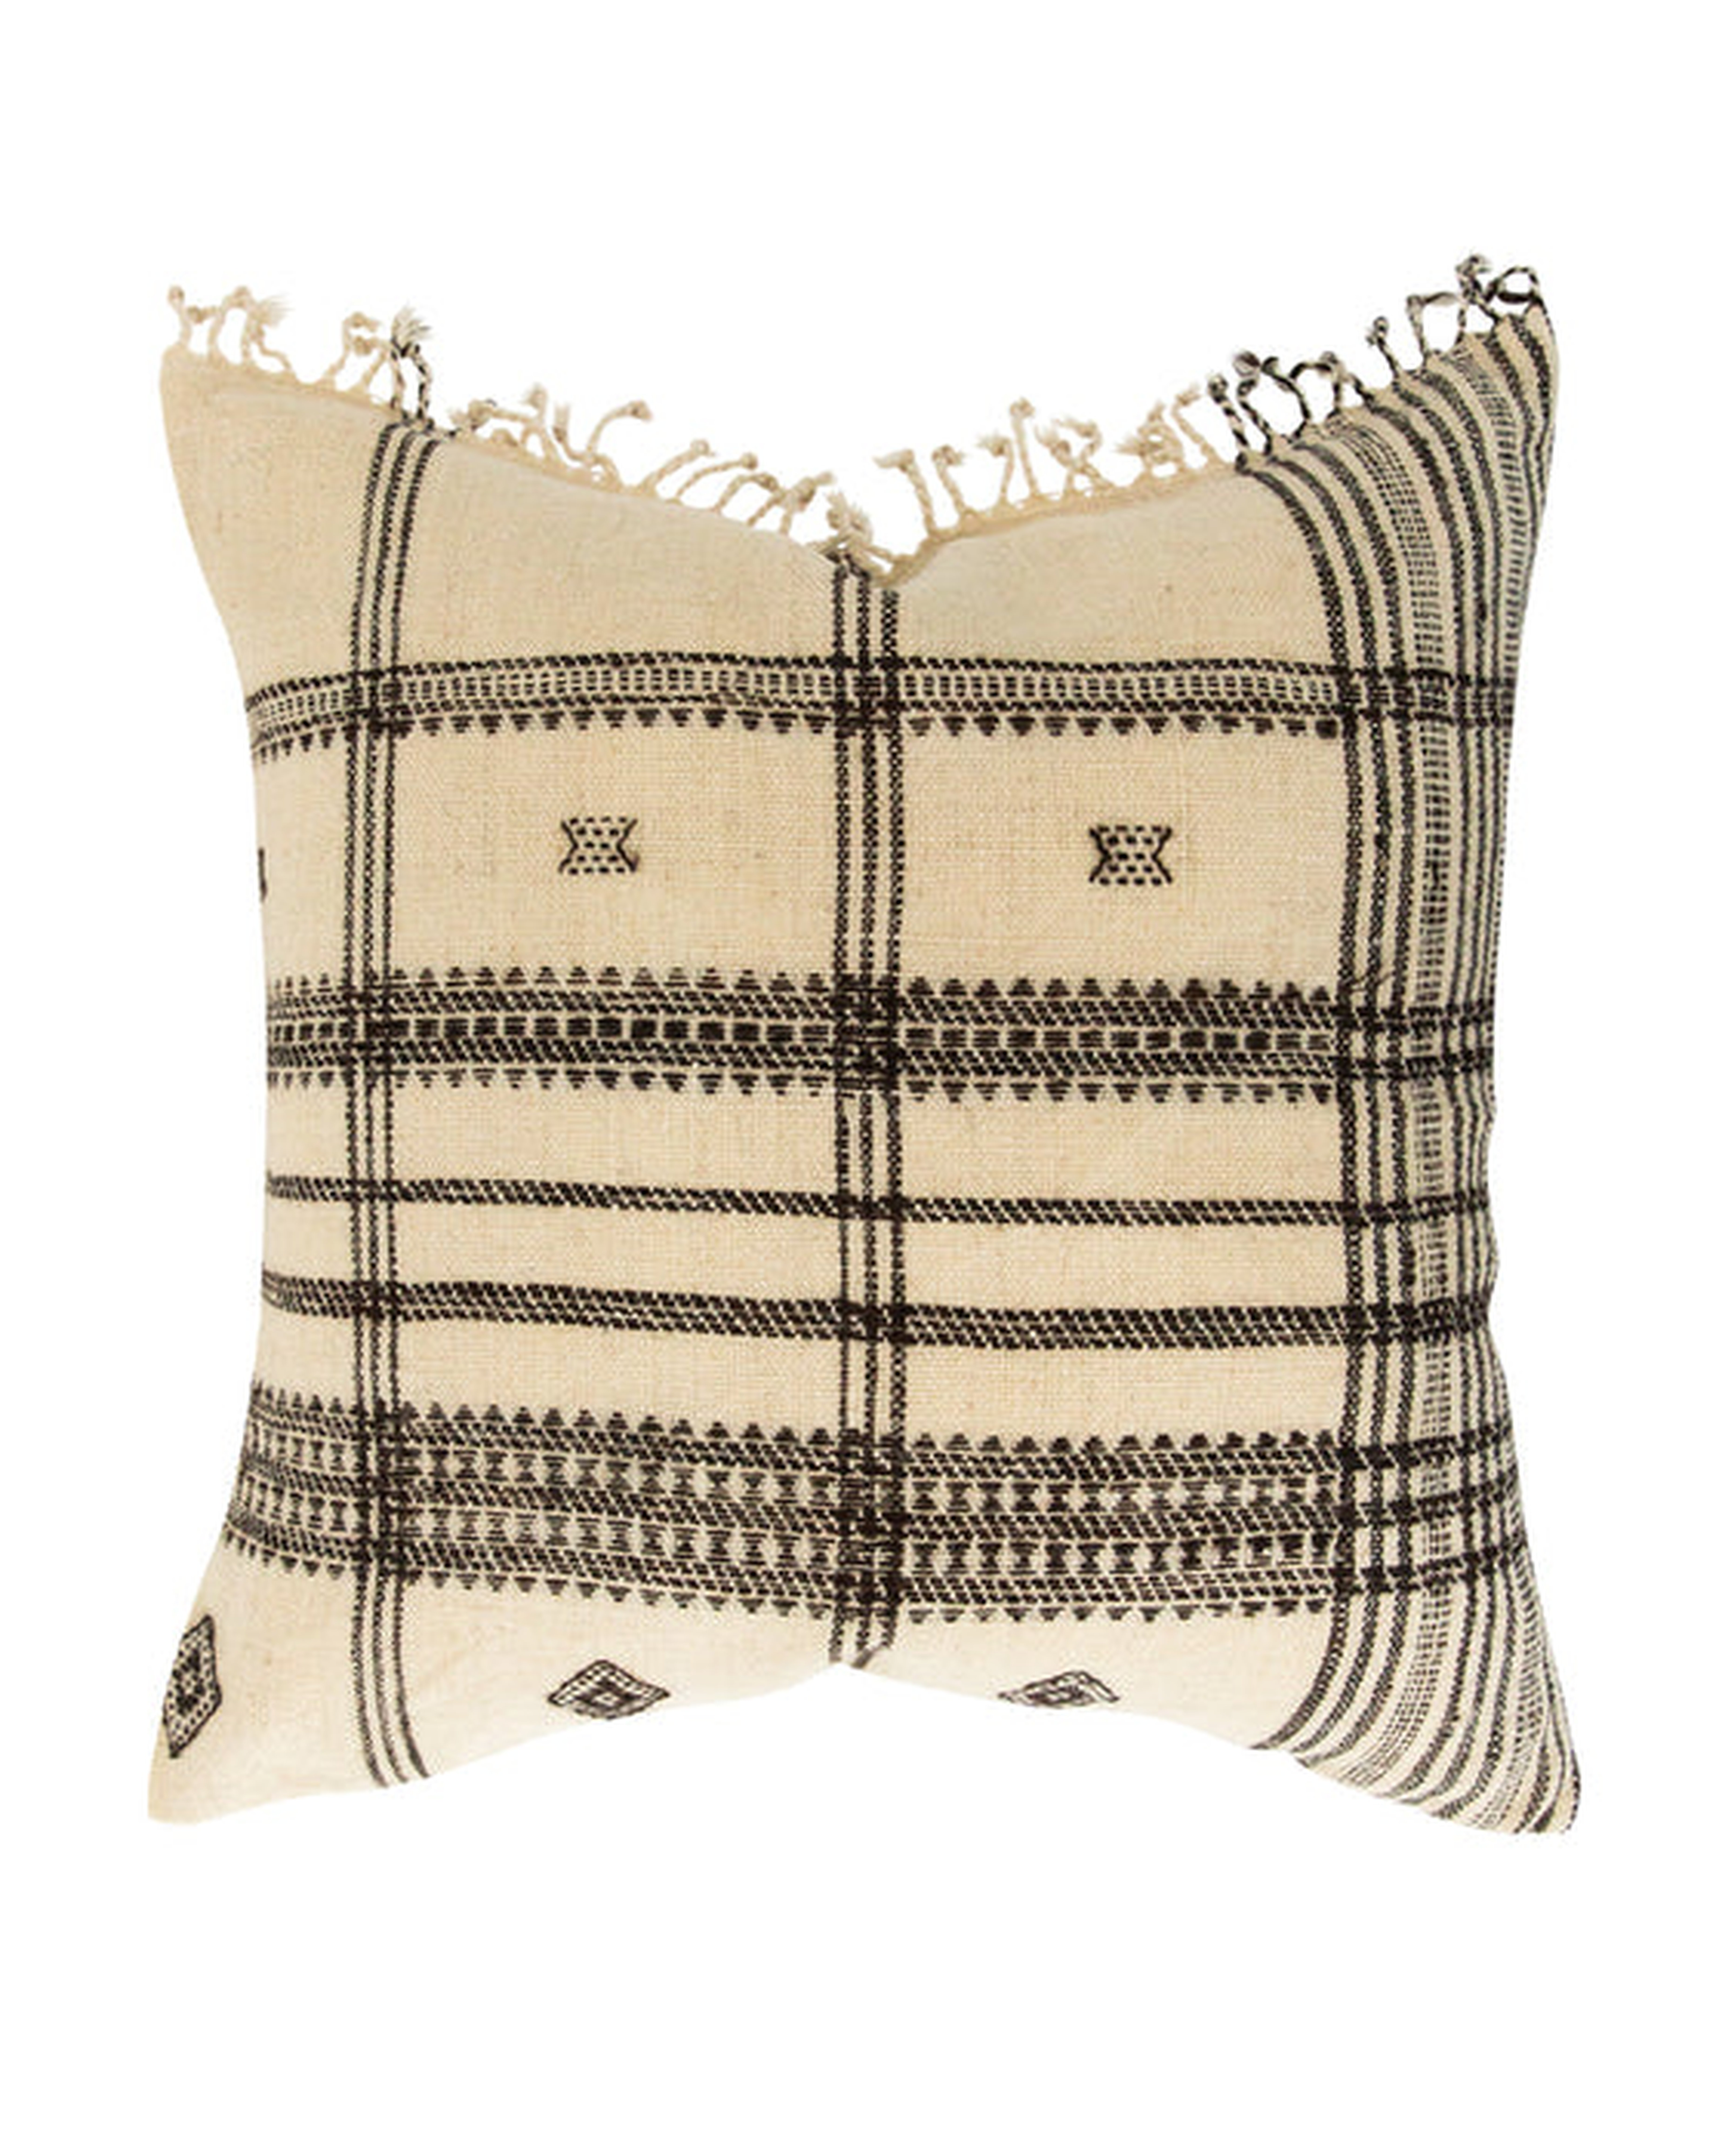 Zali Pillow Cover with Insert, 20" x 20" - McGee & Co.